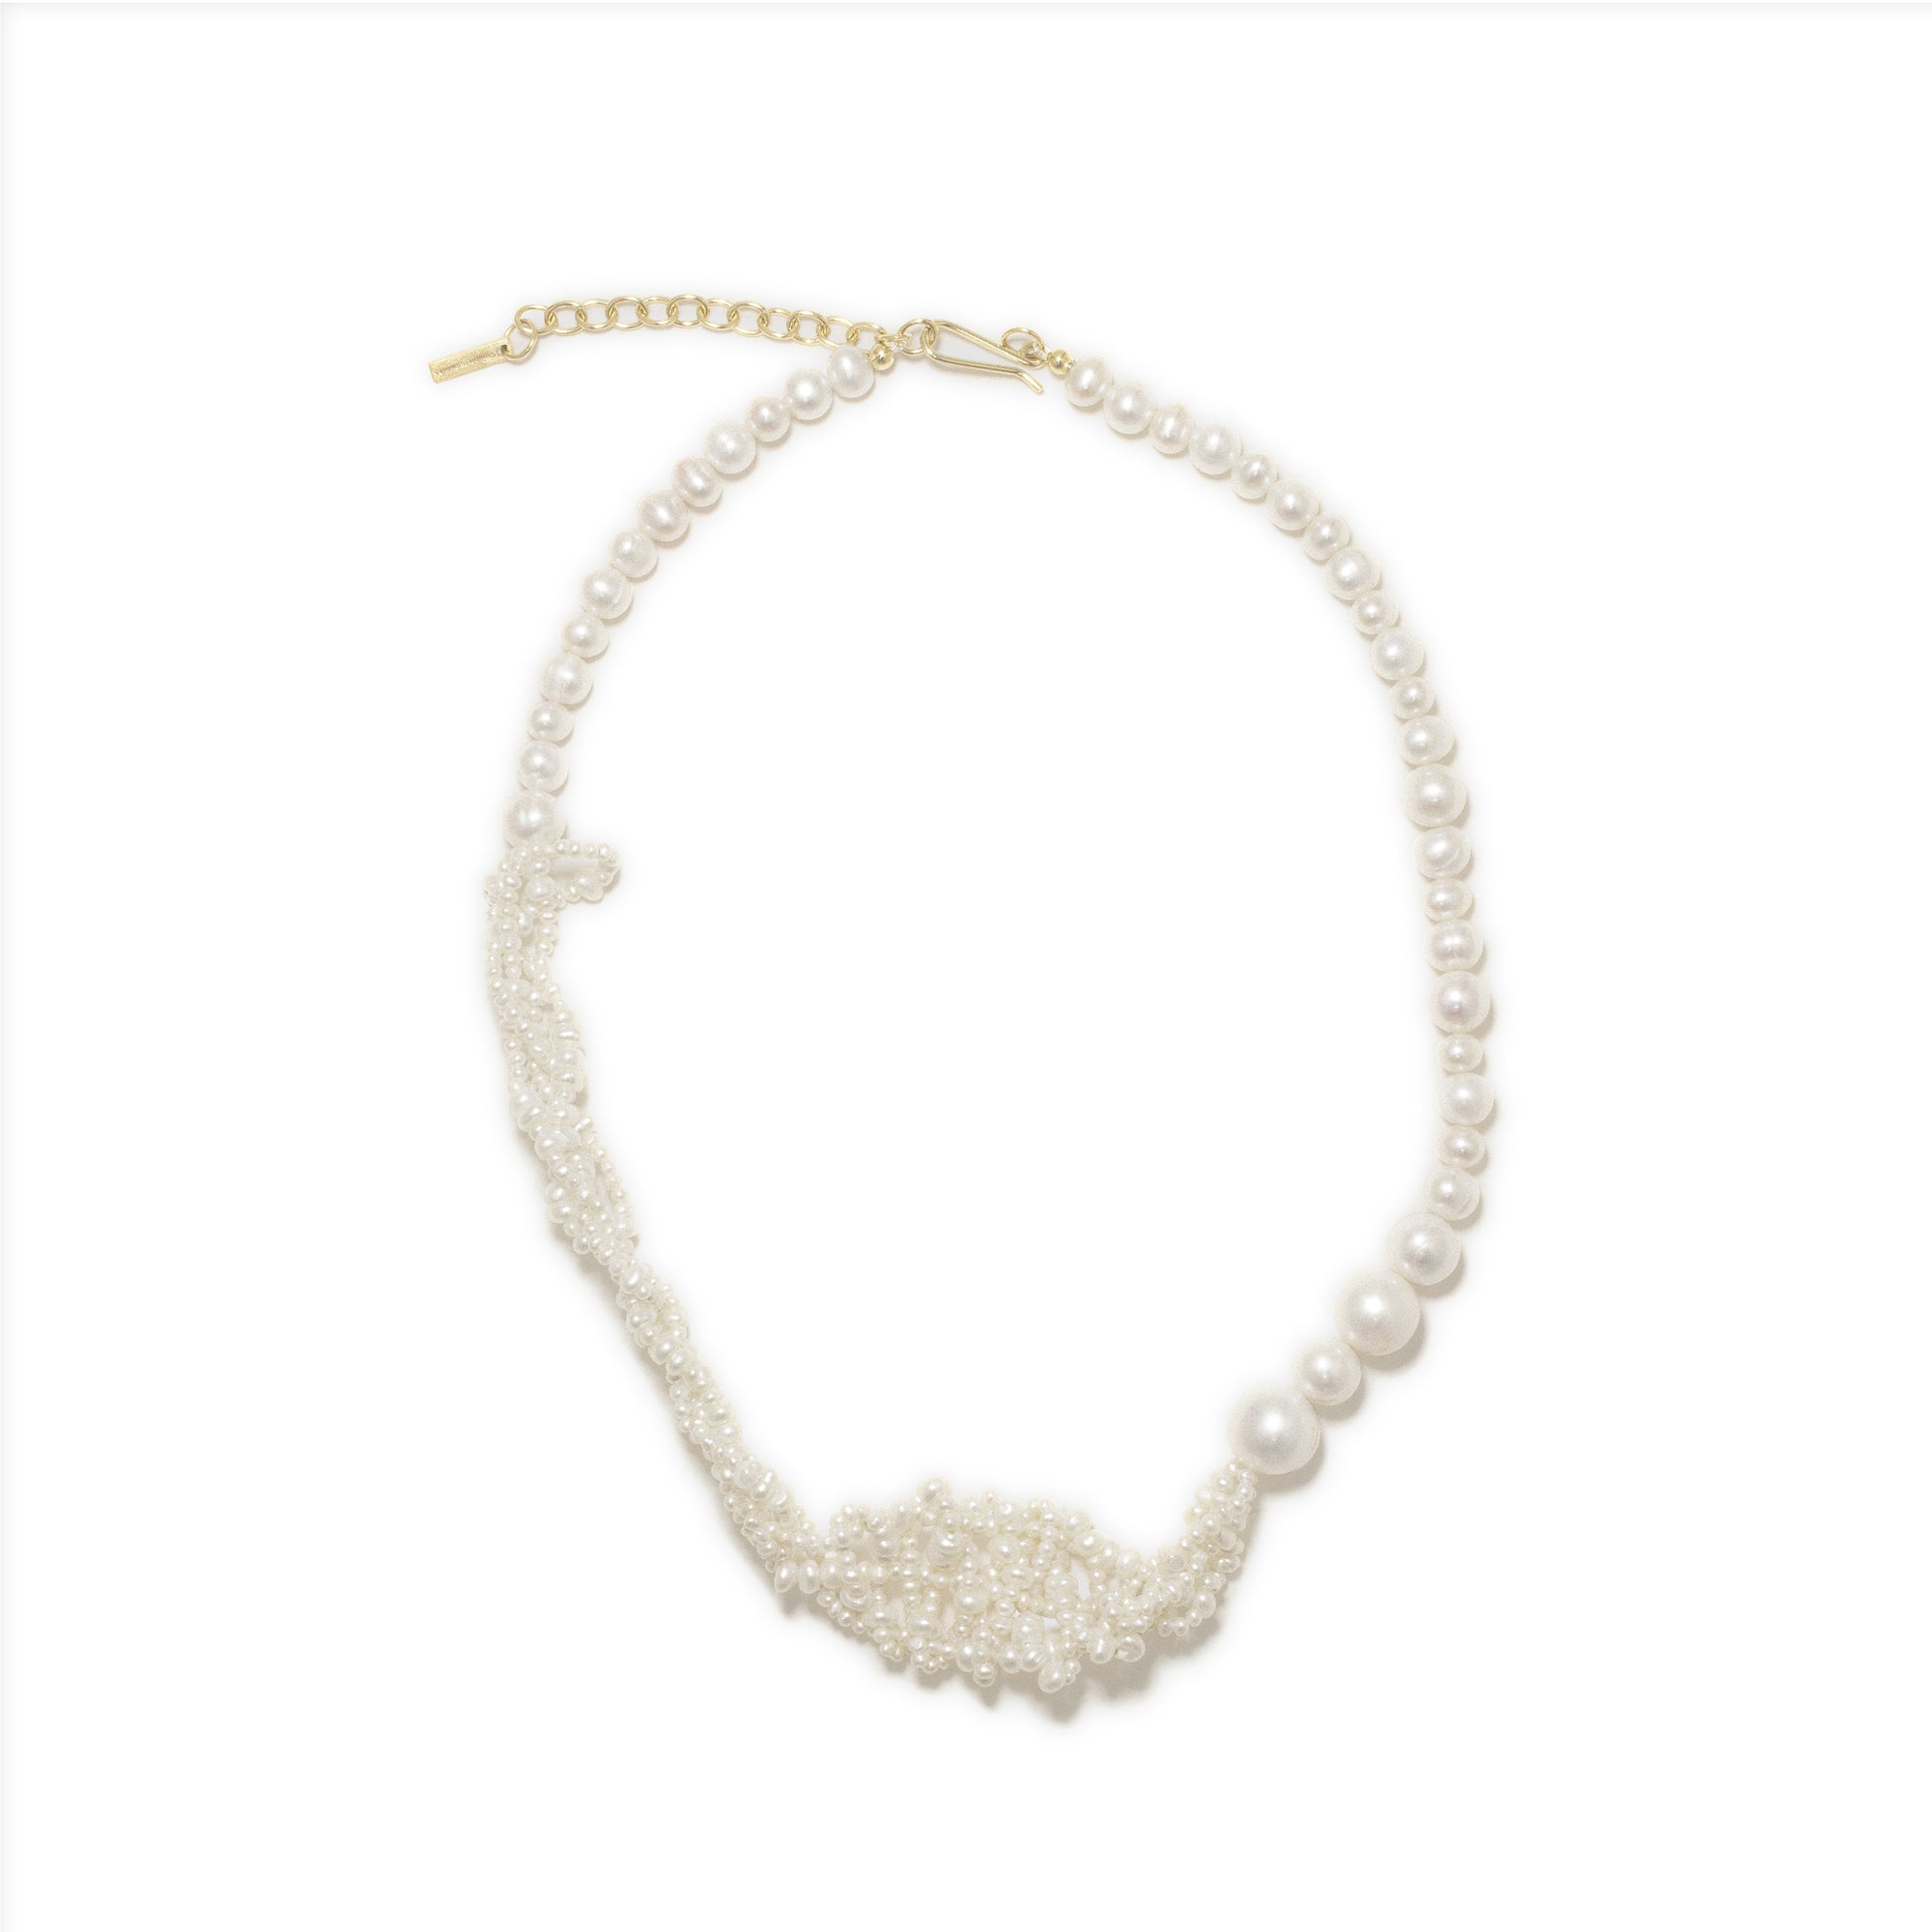 Completedworks - Women's Cove Necklace - (Pearl/Gold Vermeil) view 1